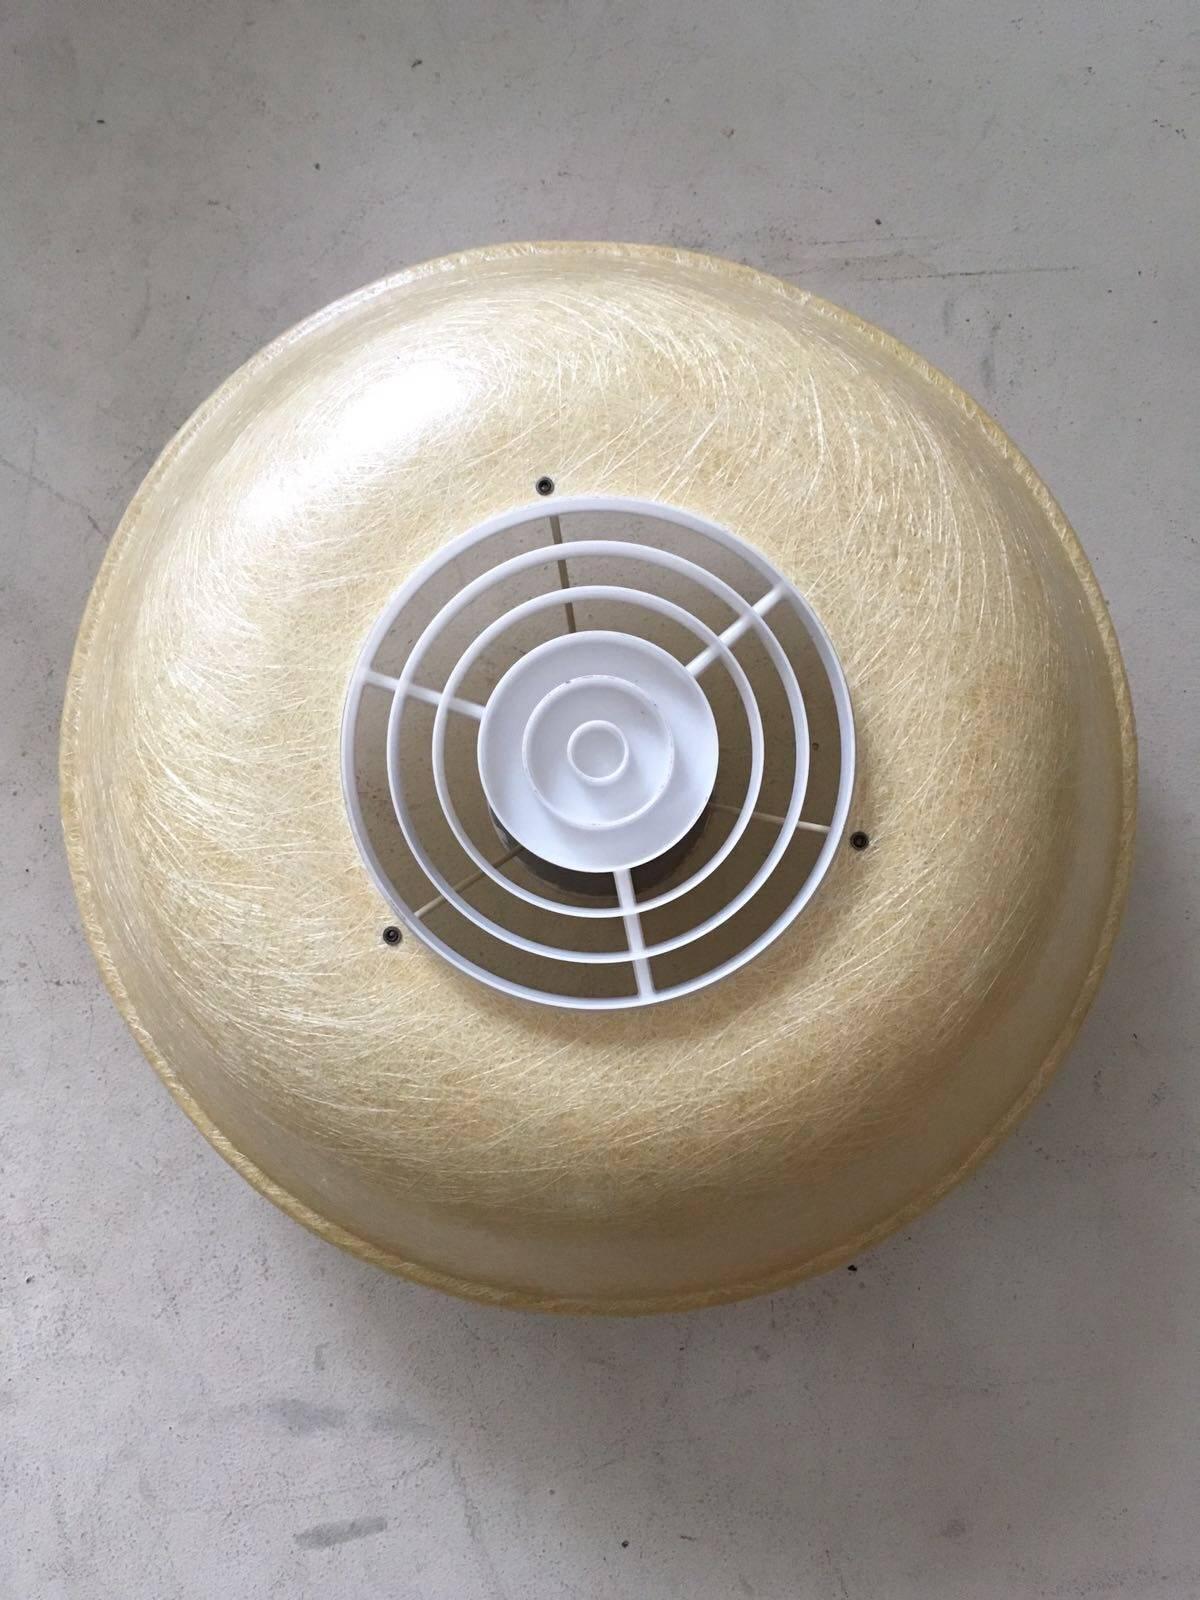 This Industrial model was designed by Louis Kalff for Philips. It was manufactured in the Netherlands, circa 1950s. This piece features a fiberglass shell and light diffusing ring of plastic. The lamp remains in good condition but shows two very